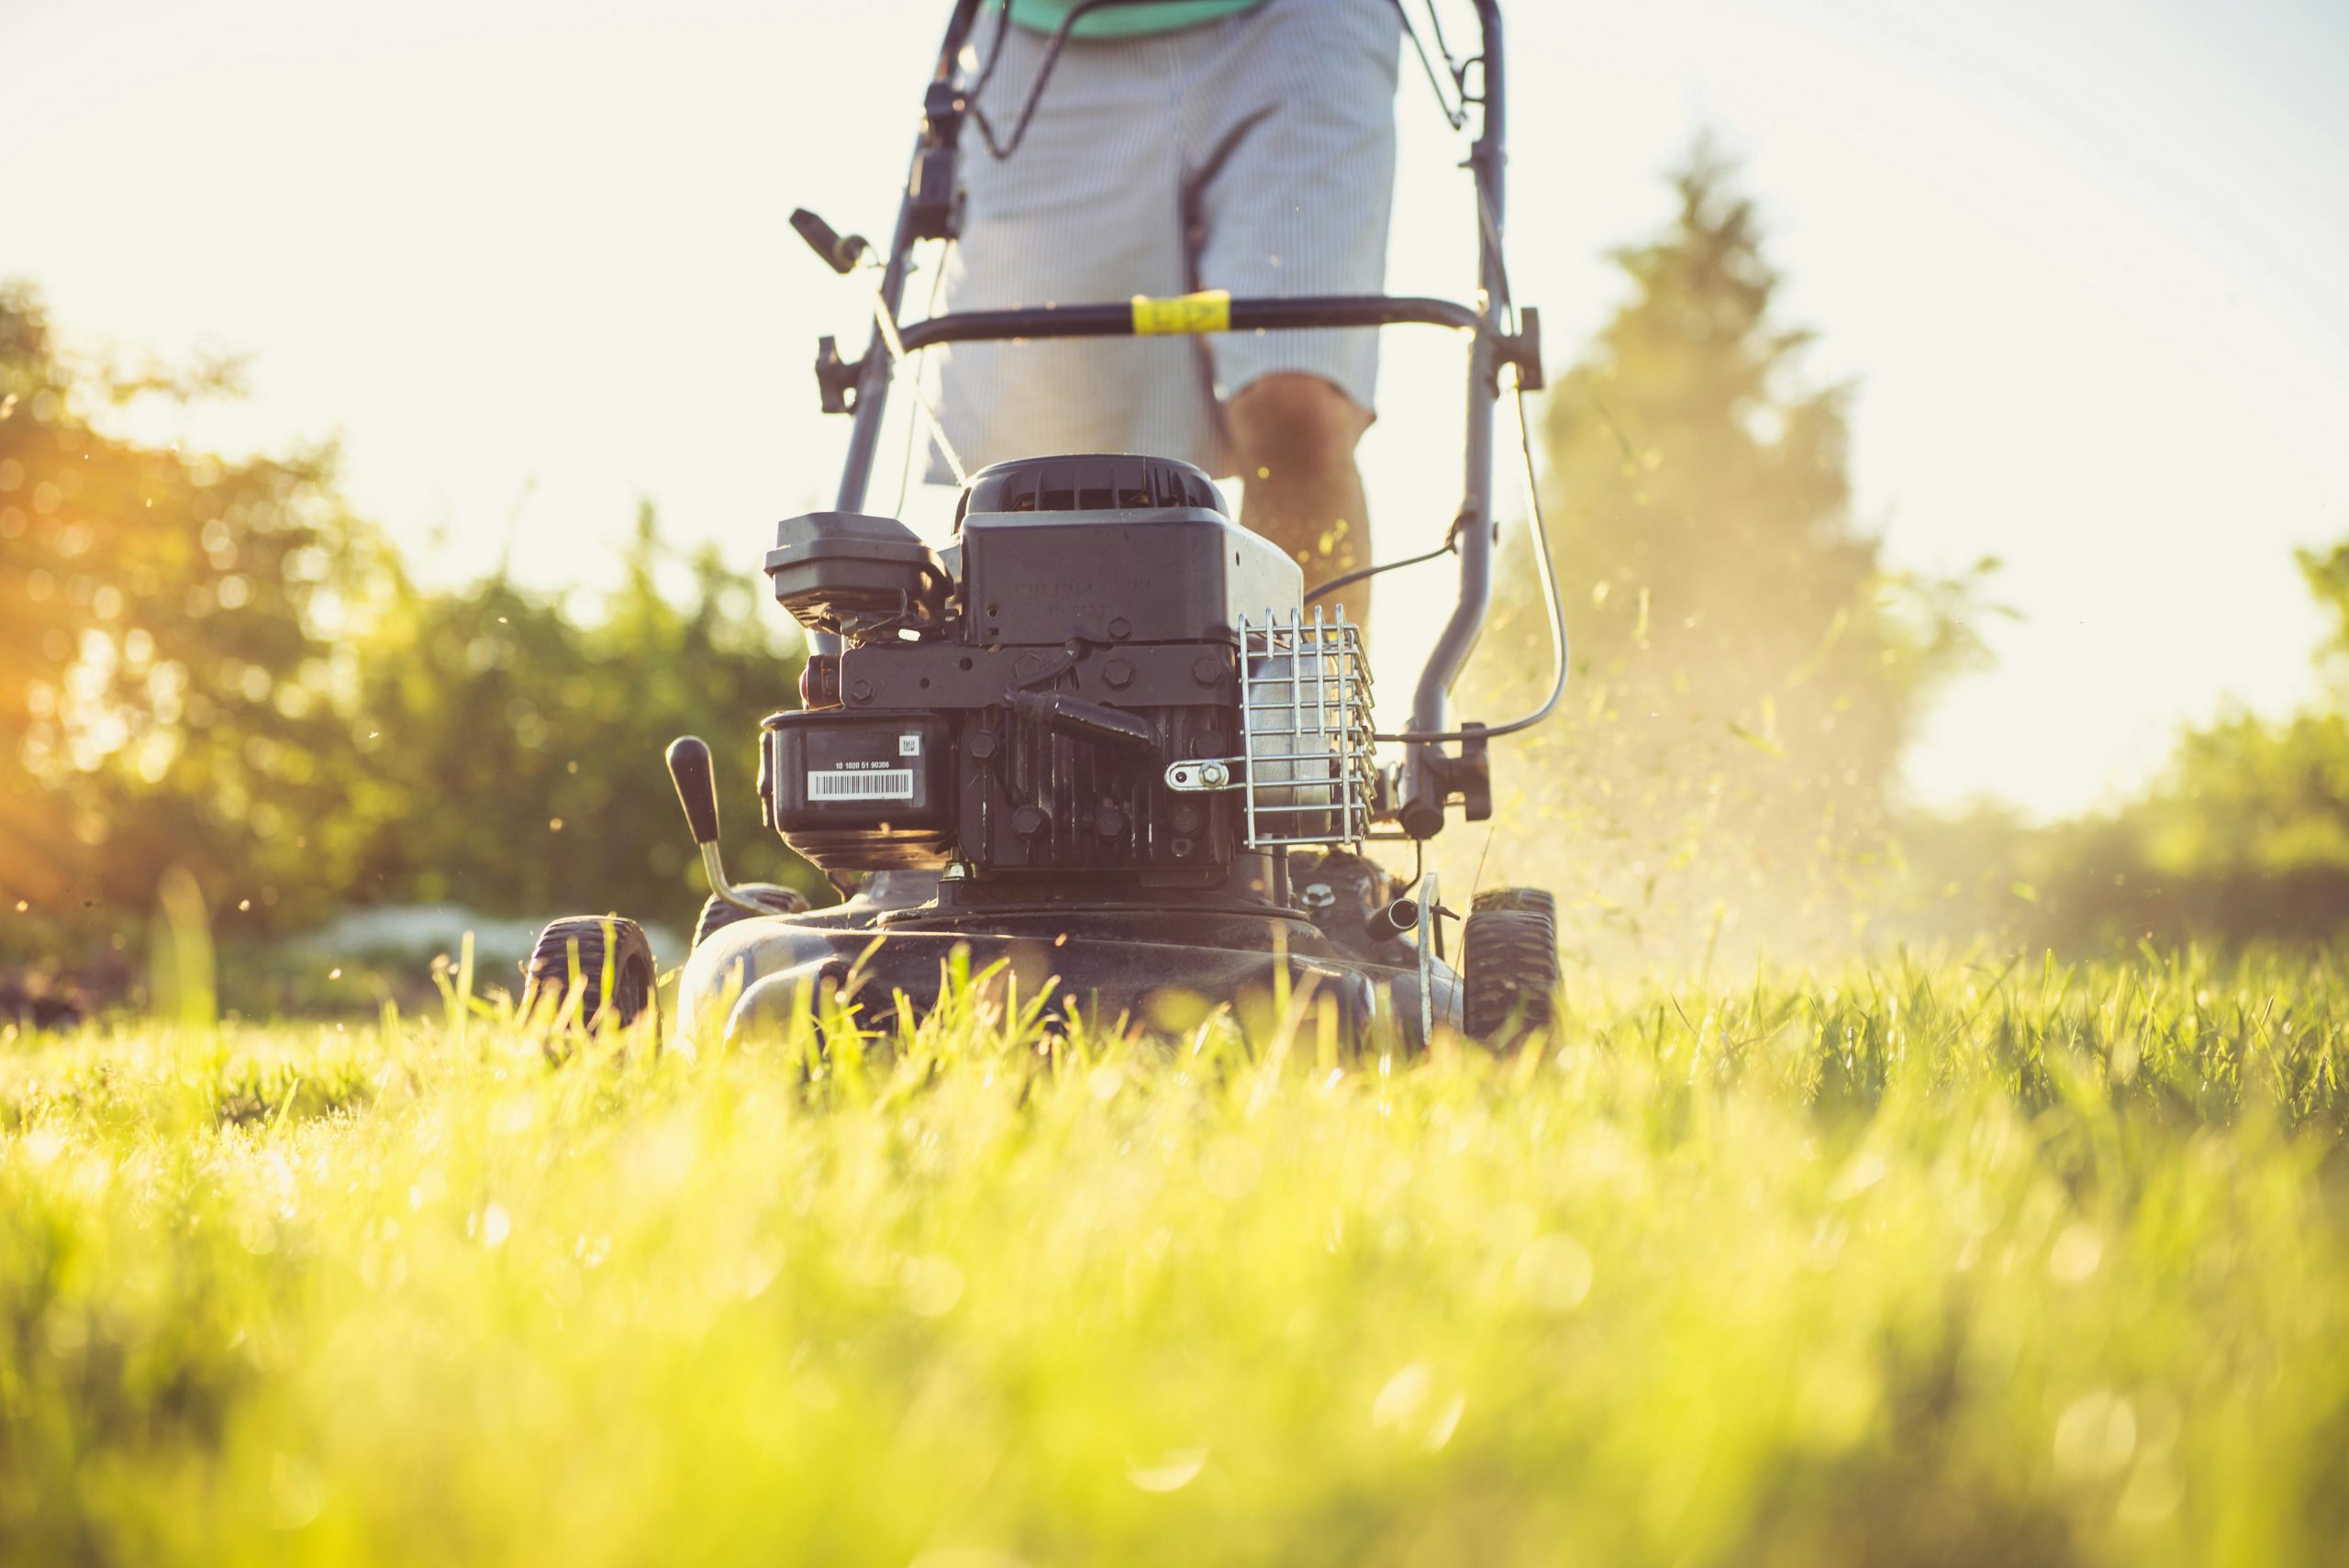 Here are some easy-to-follow guidelines to help you find the best mowing routine for your lawn.